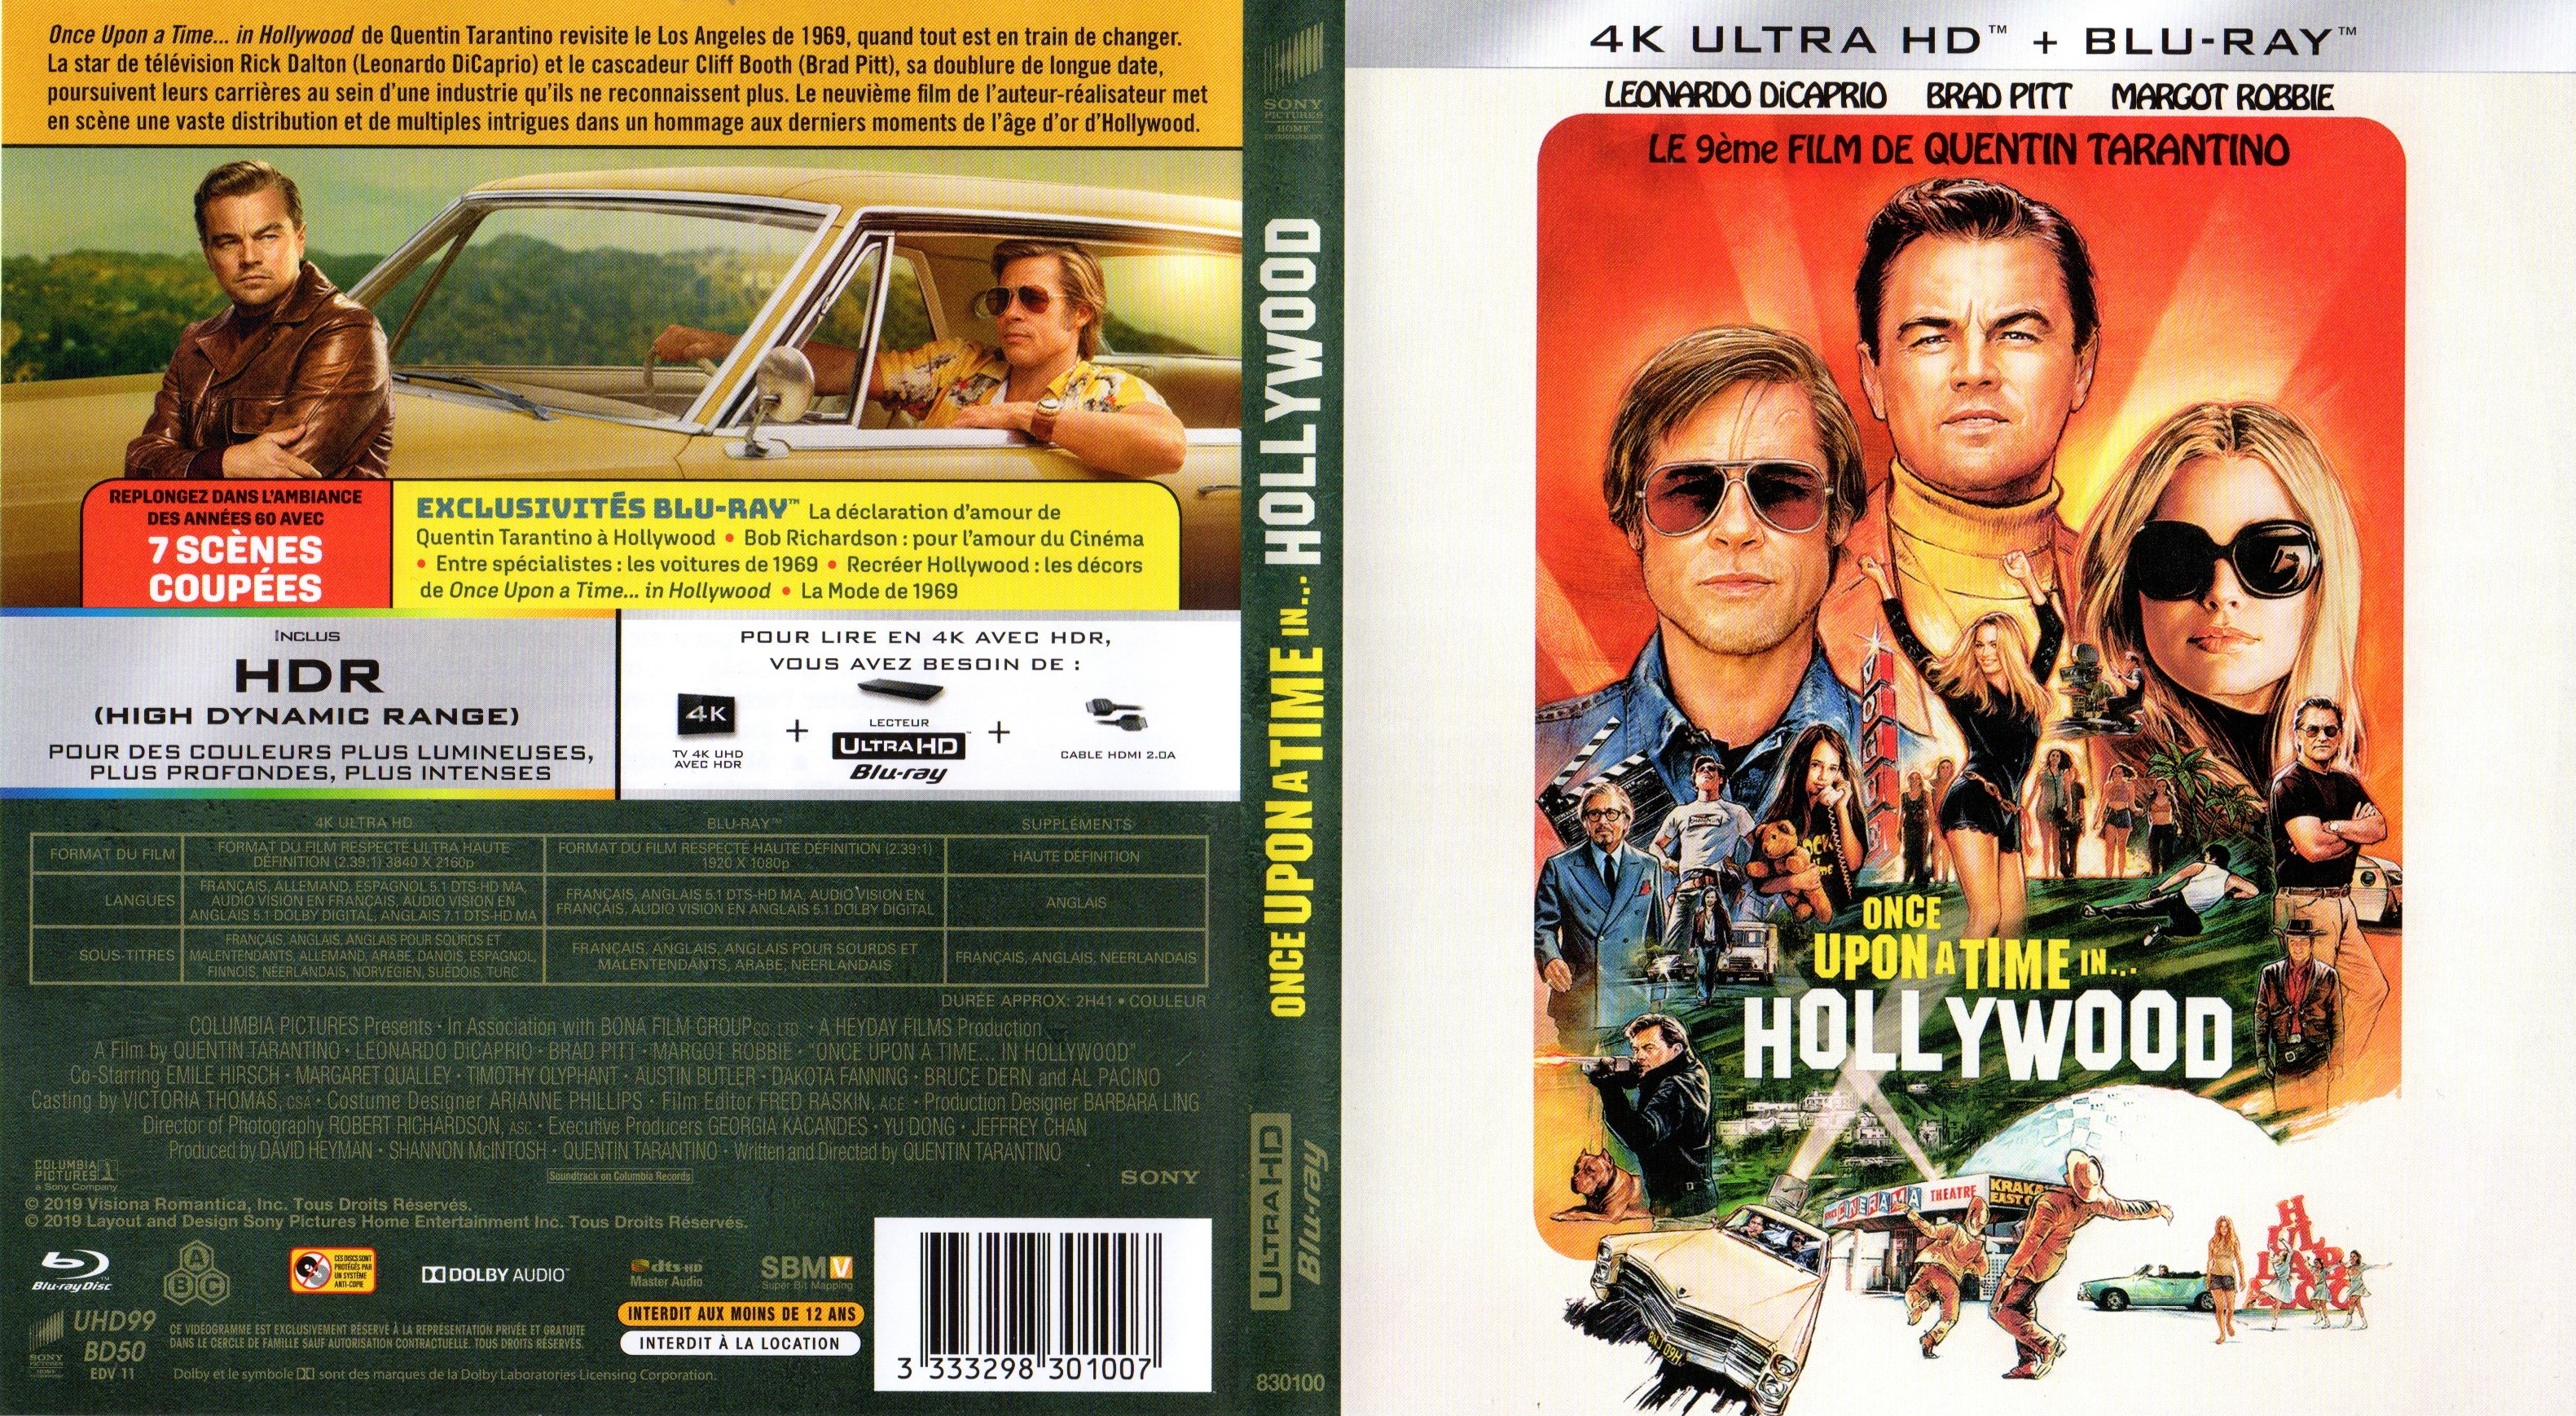 Jaquette DVD Once Upon A Time...in Hollywood (BLU-RAY)